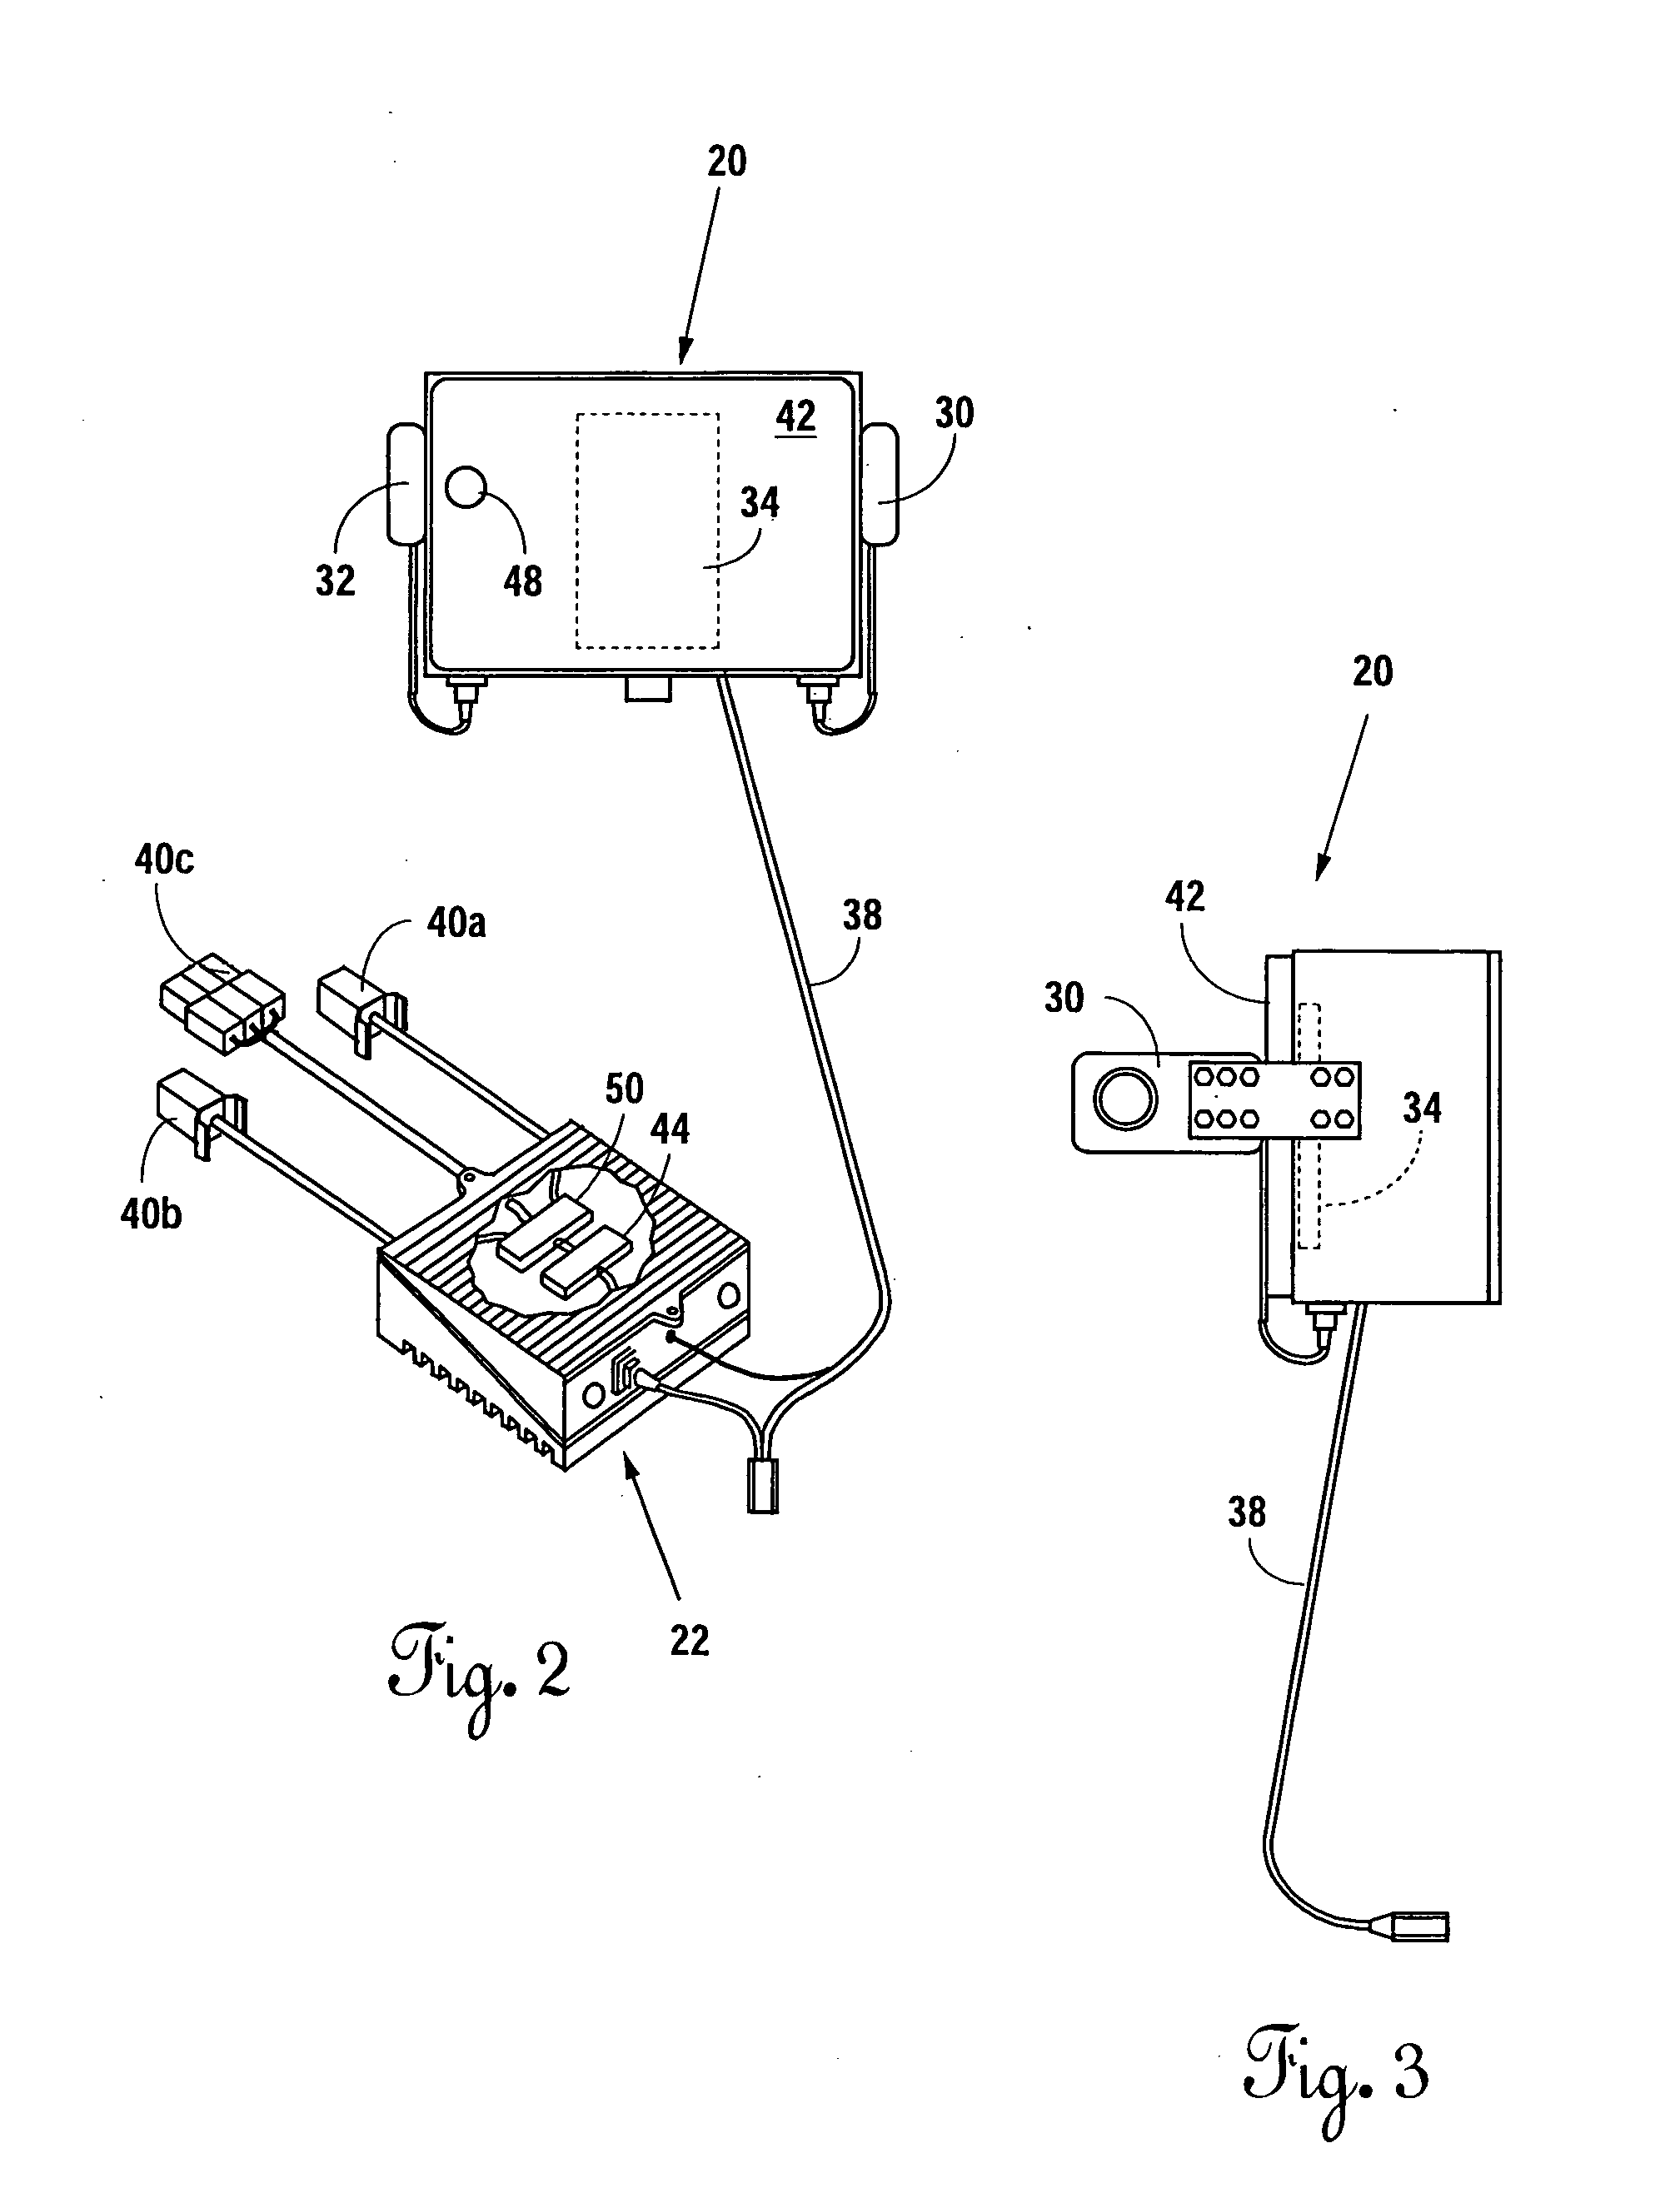 Method and apparatus for electronically controlling a motorized device